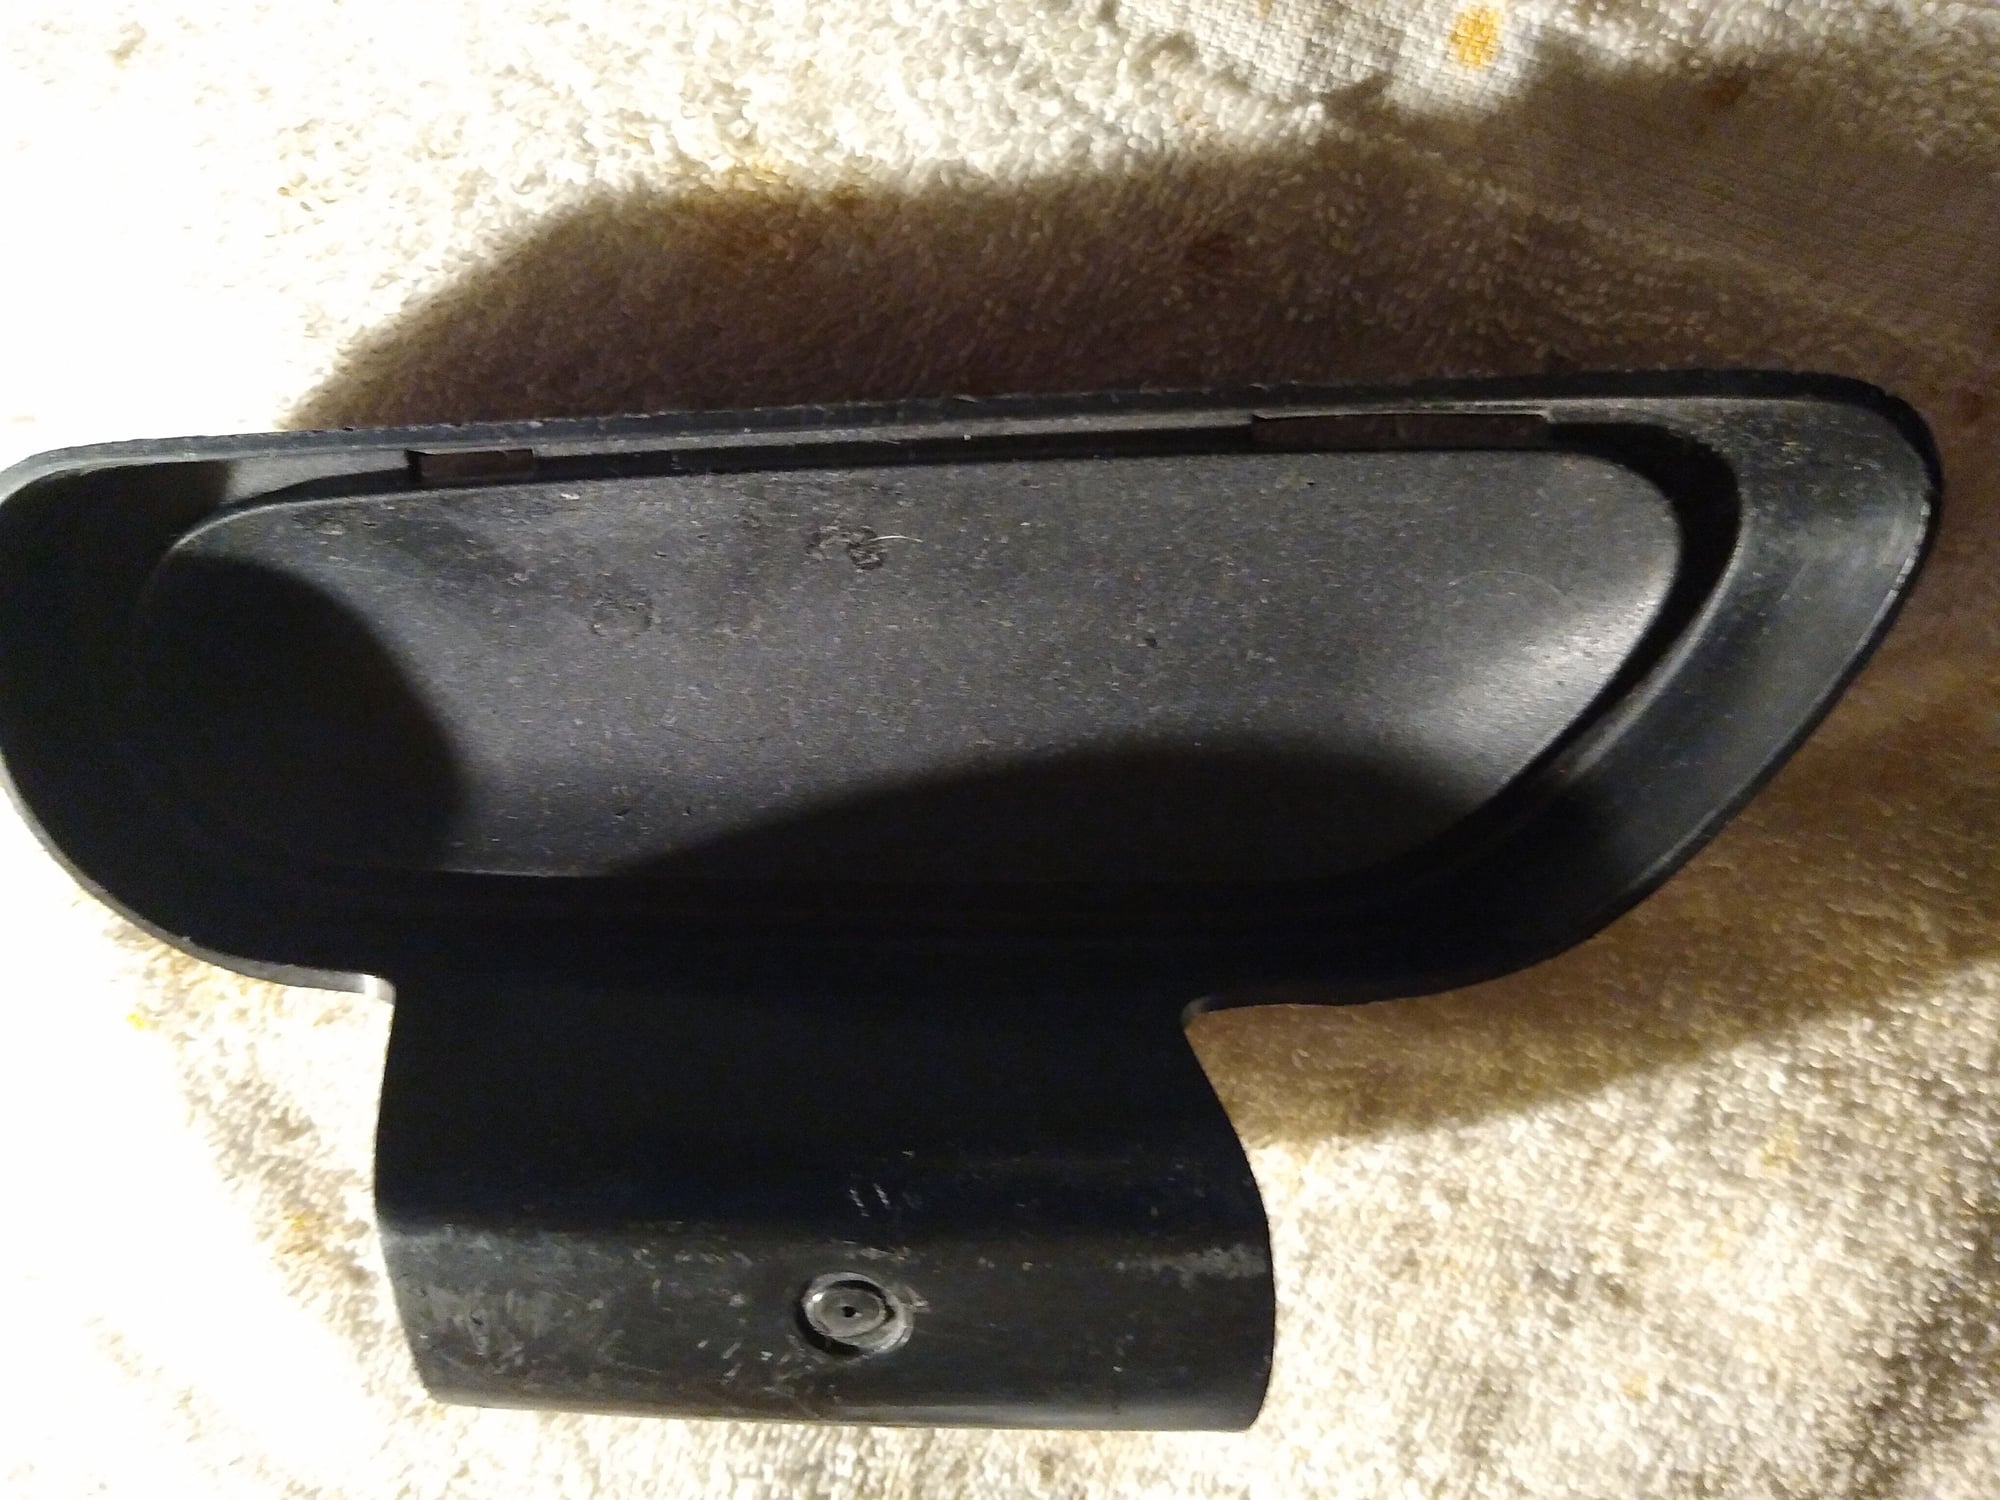 Miscellaneous - FD - Optional Front Bumper Air Vent Plug - Used - 1993 to 2002 Mazda RX-7 - San Jose, CA 95121, United States